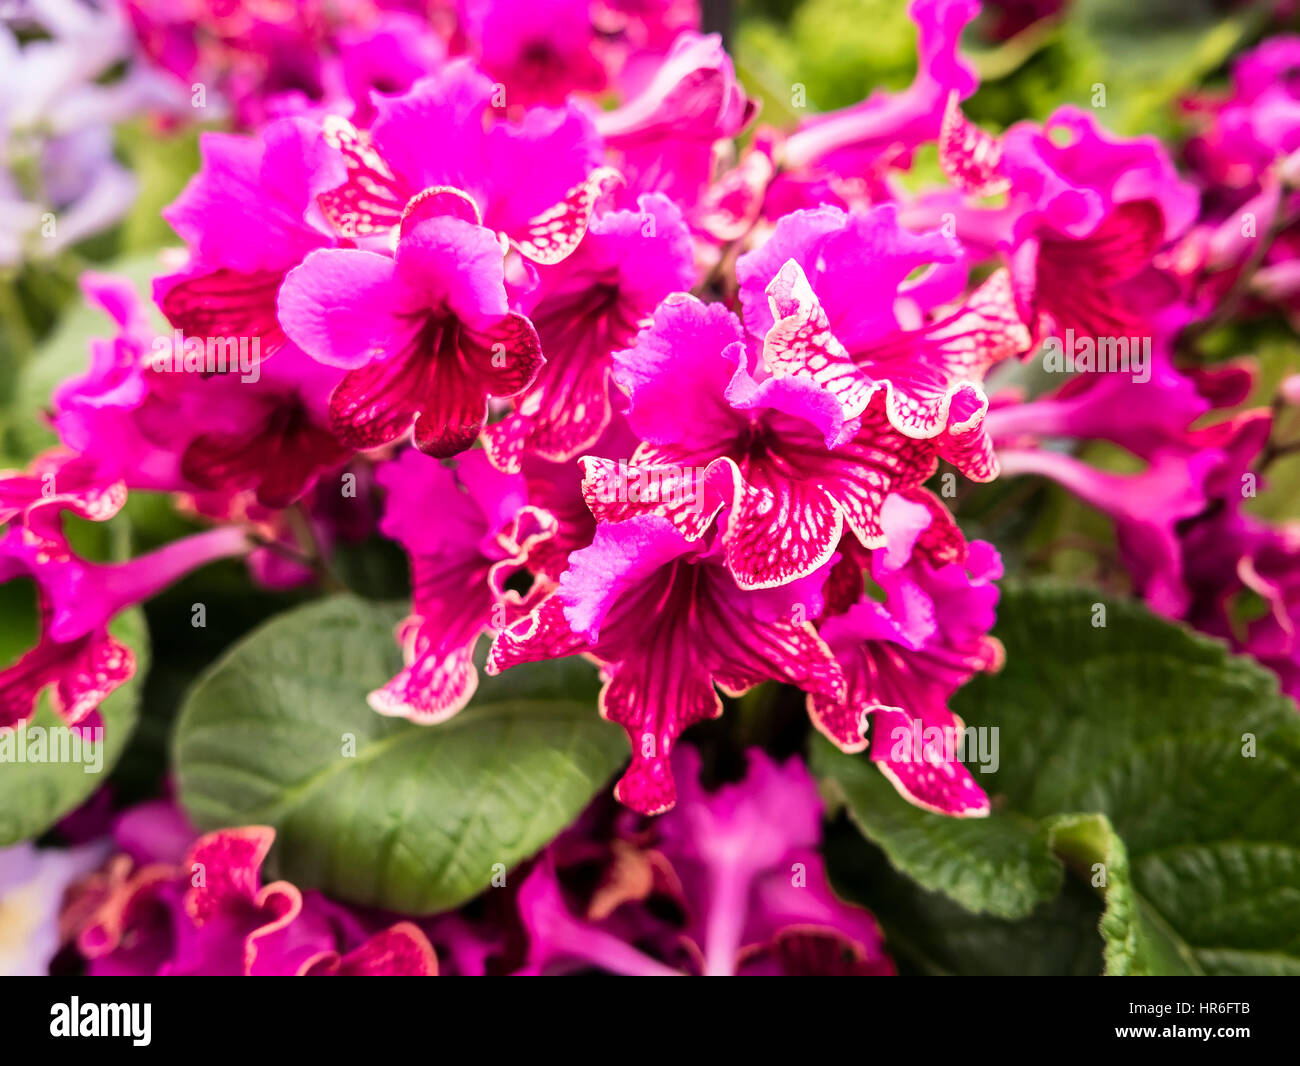 Streptocarpus Cariad flowering at a show in UK Stock Photo